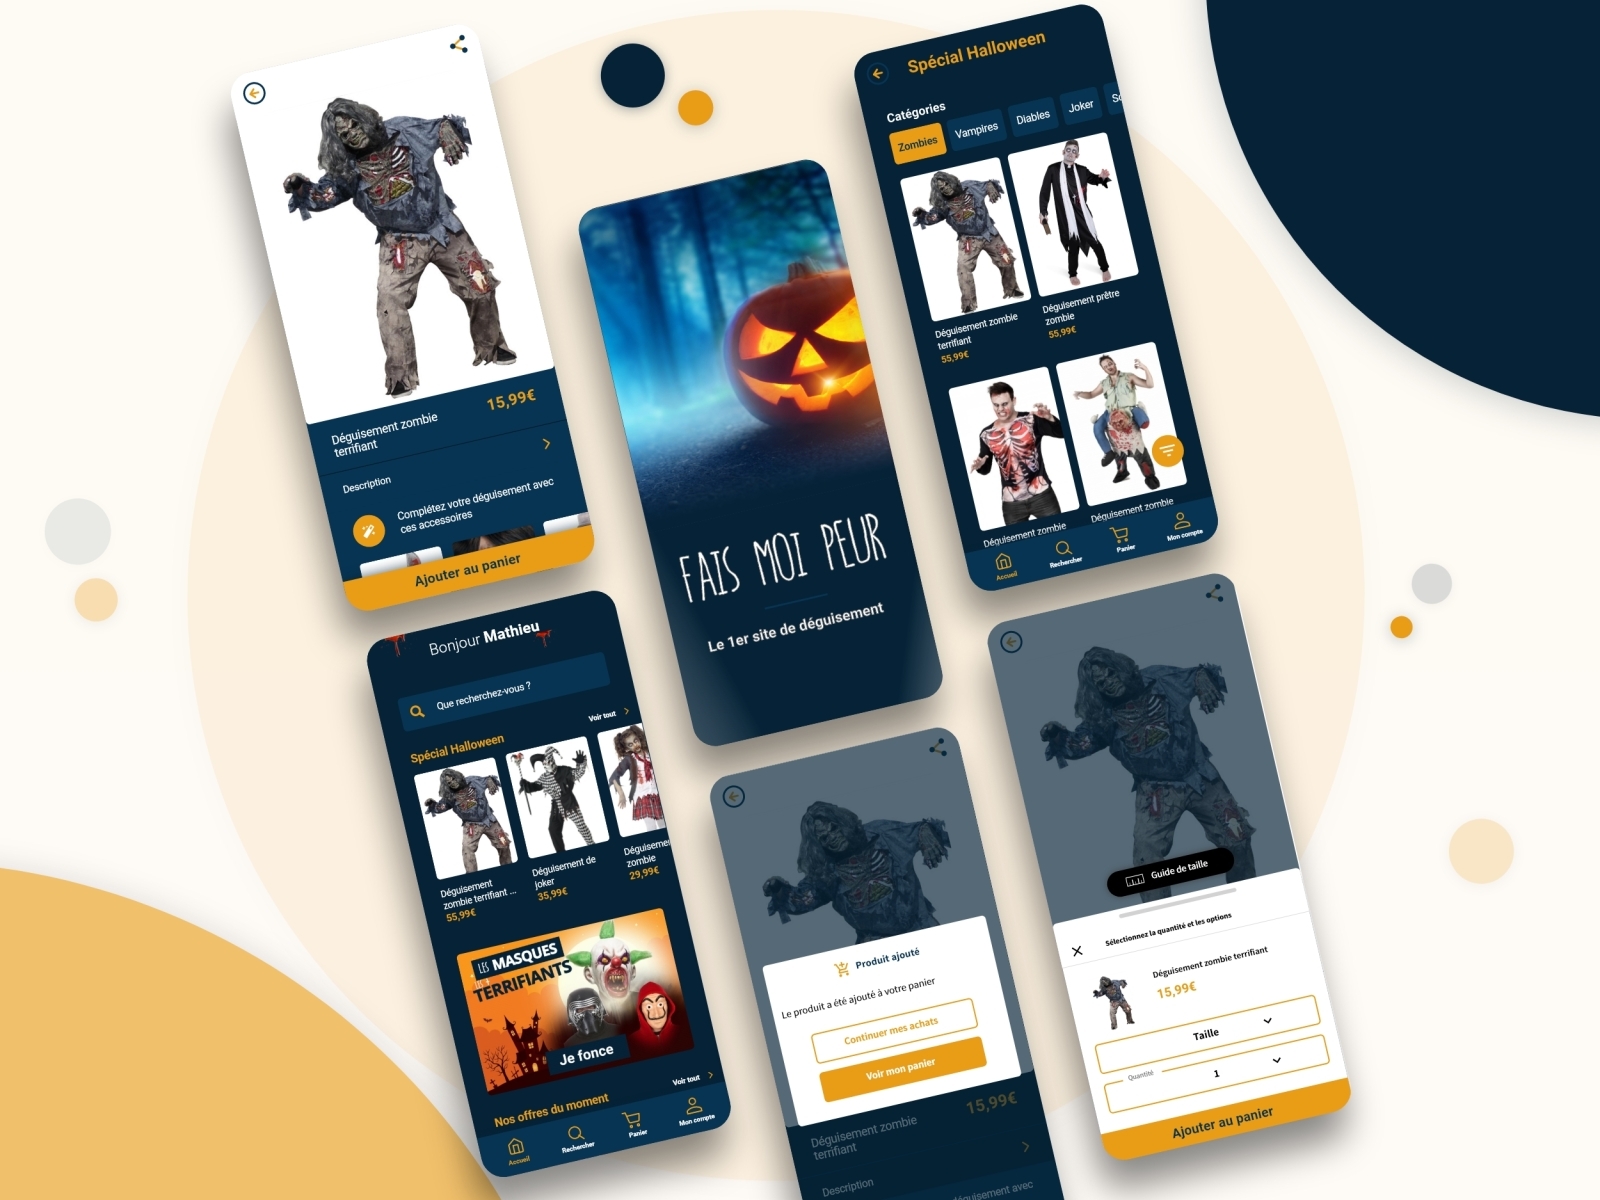 Halloween e-commerce mobile app by Mathieu Loubiere on Dribbble